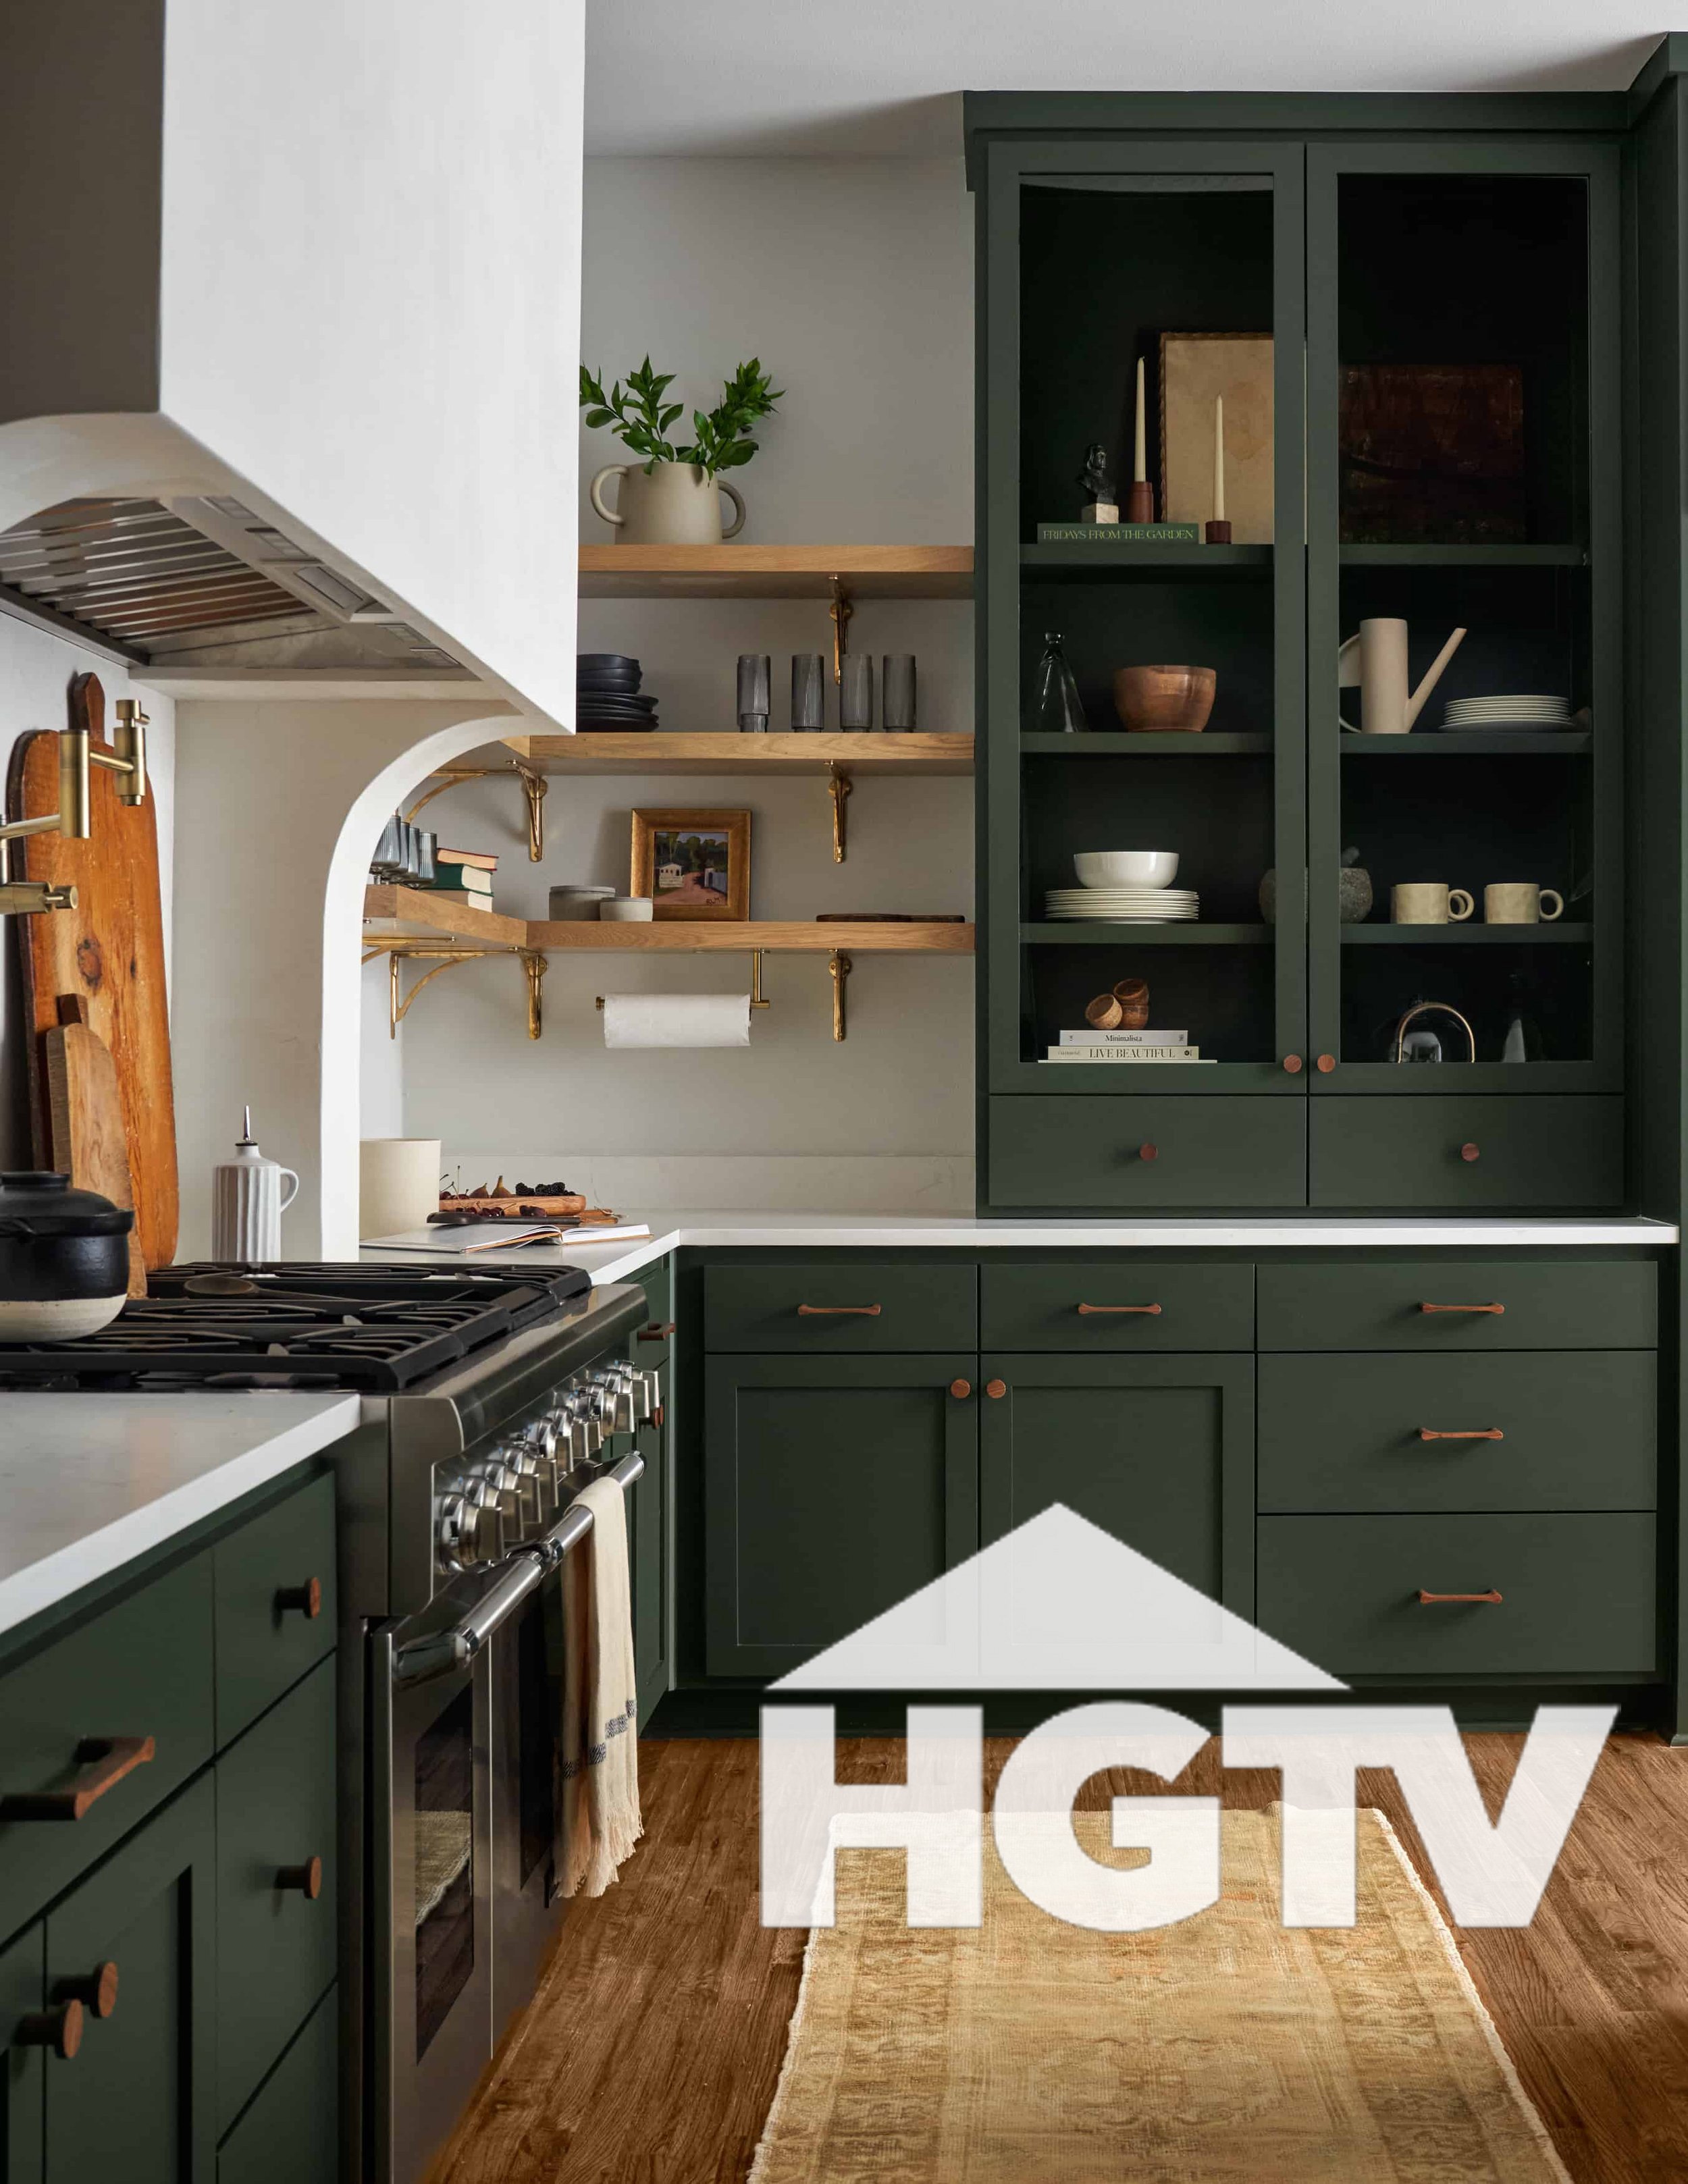 Sage Green Kitchen Cabinets with Gold Hardware - Soul & Lane